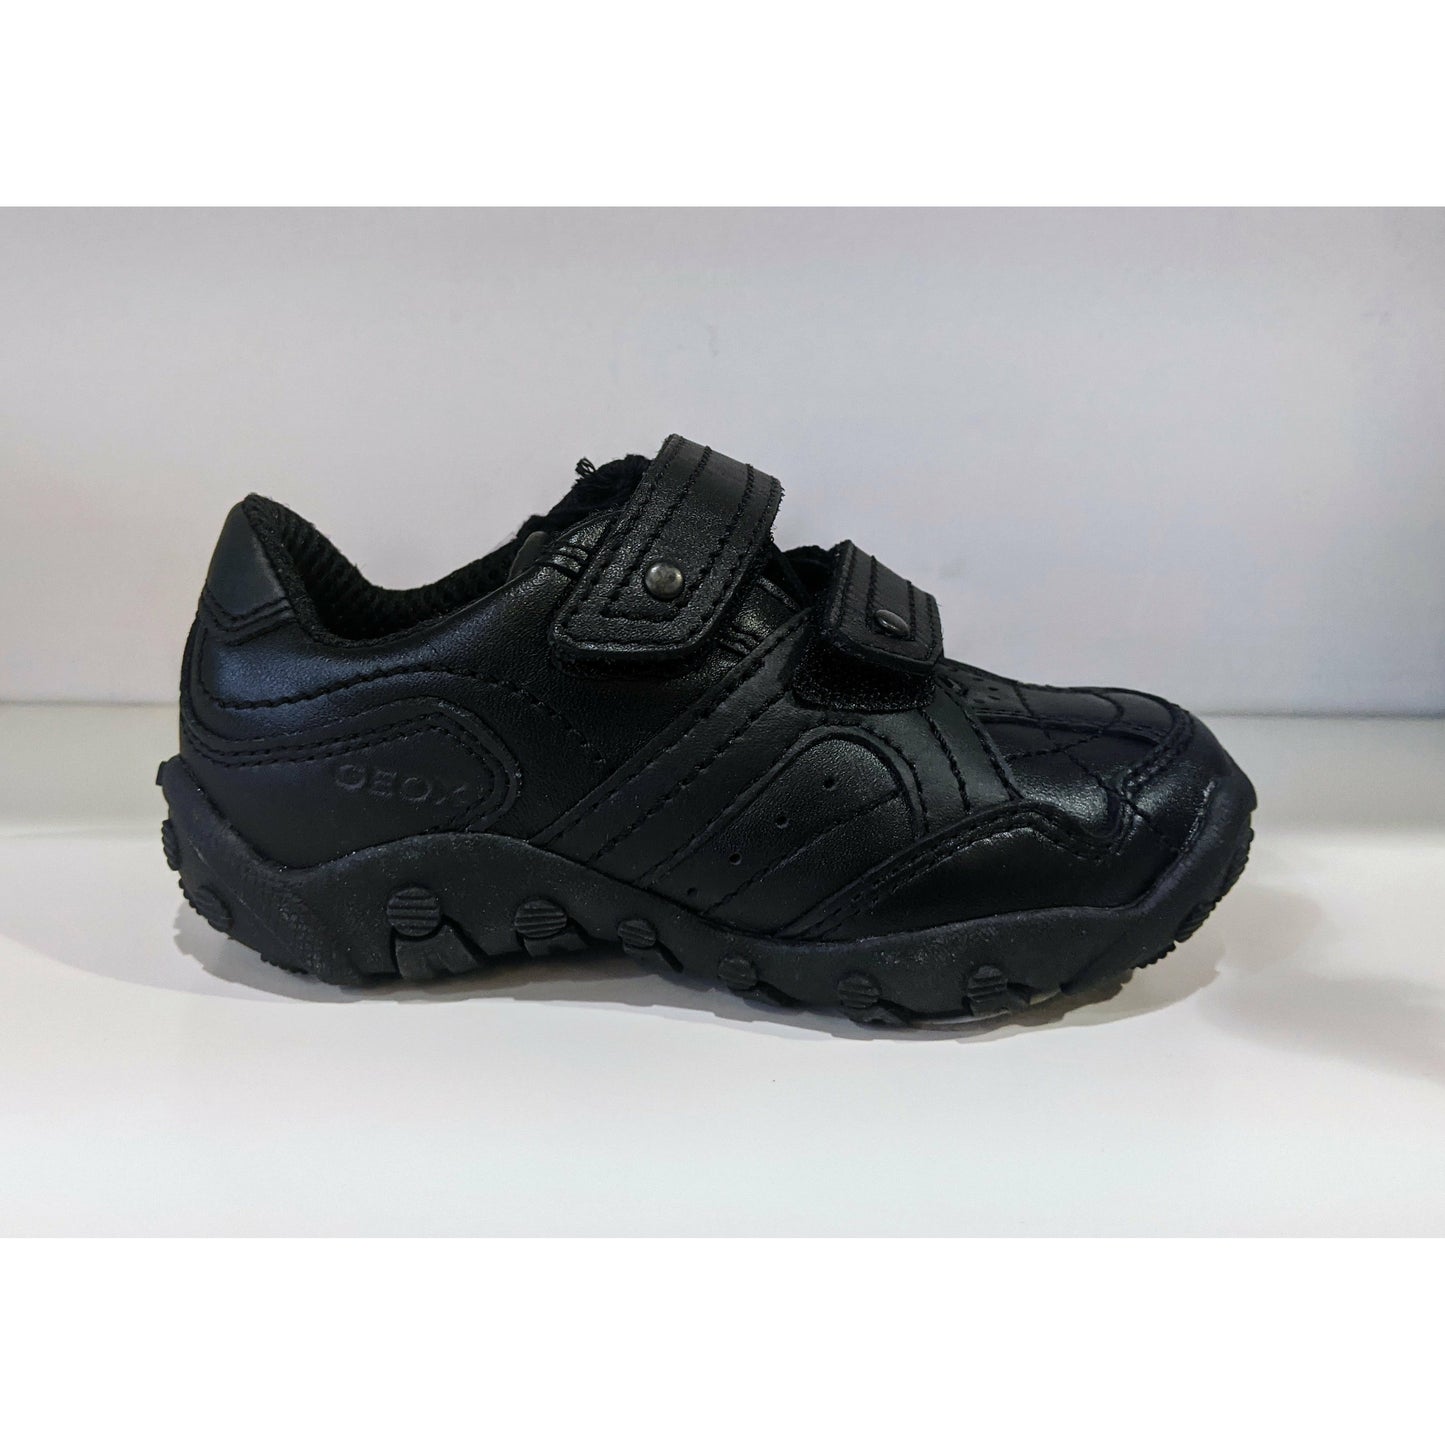 A boys casual school shoe by Geox, style Creeper, in black with double velcro fastening. Right side view.